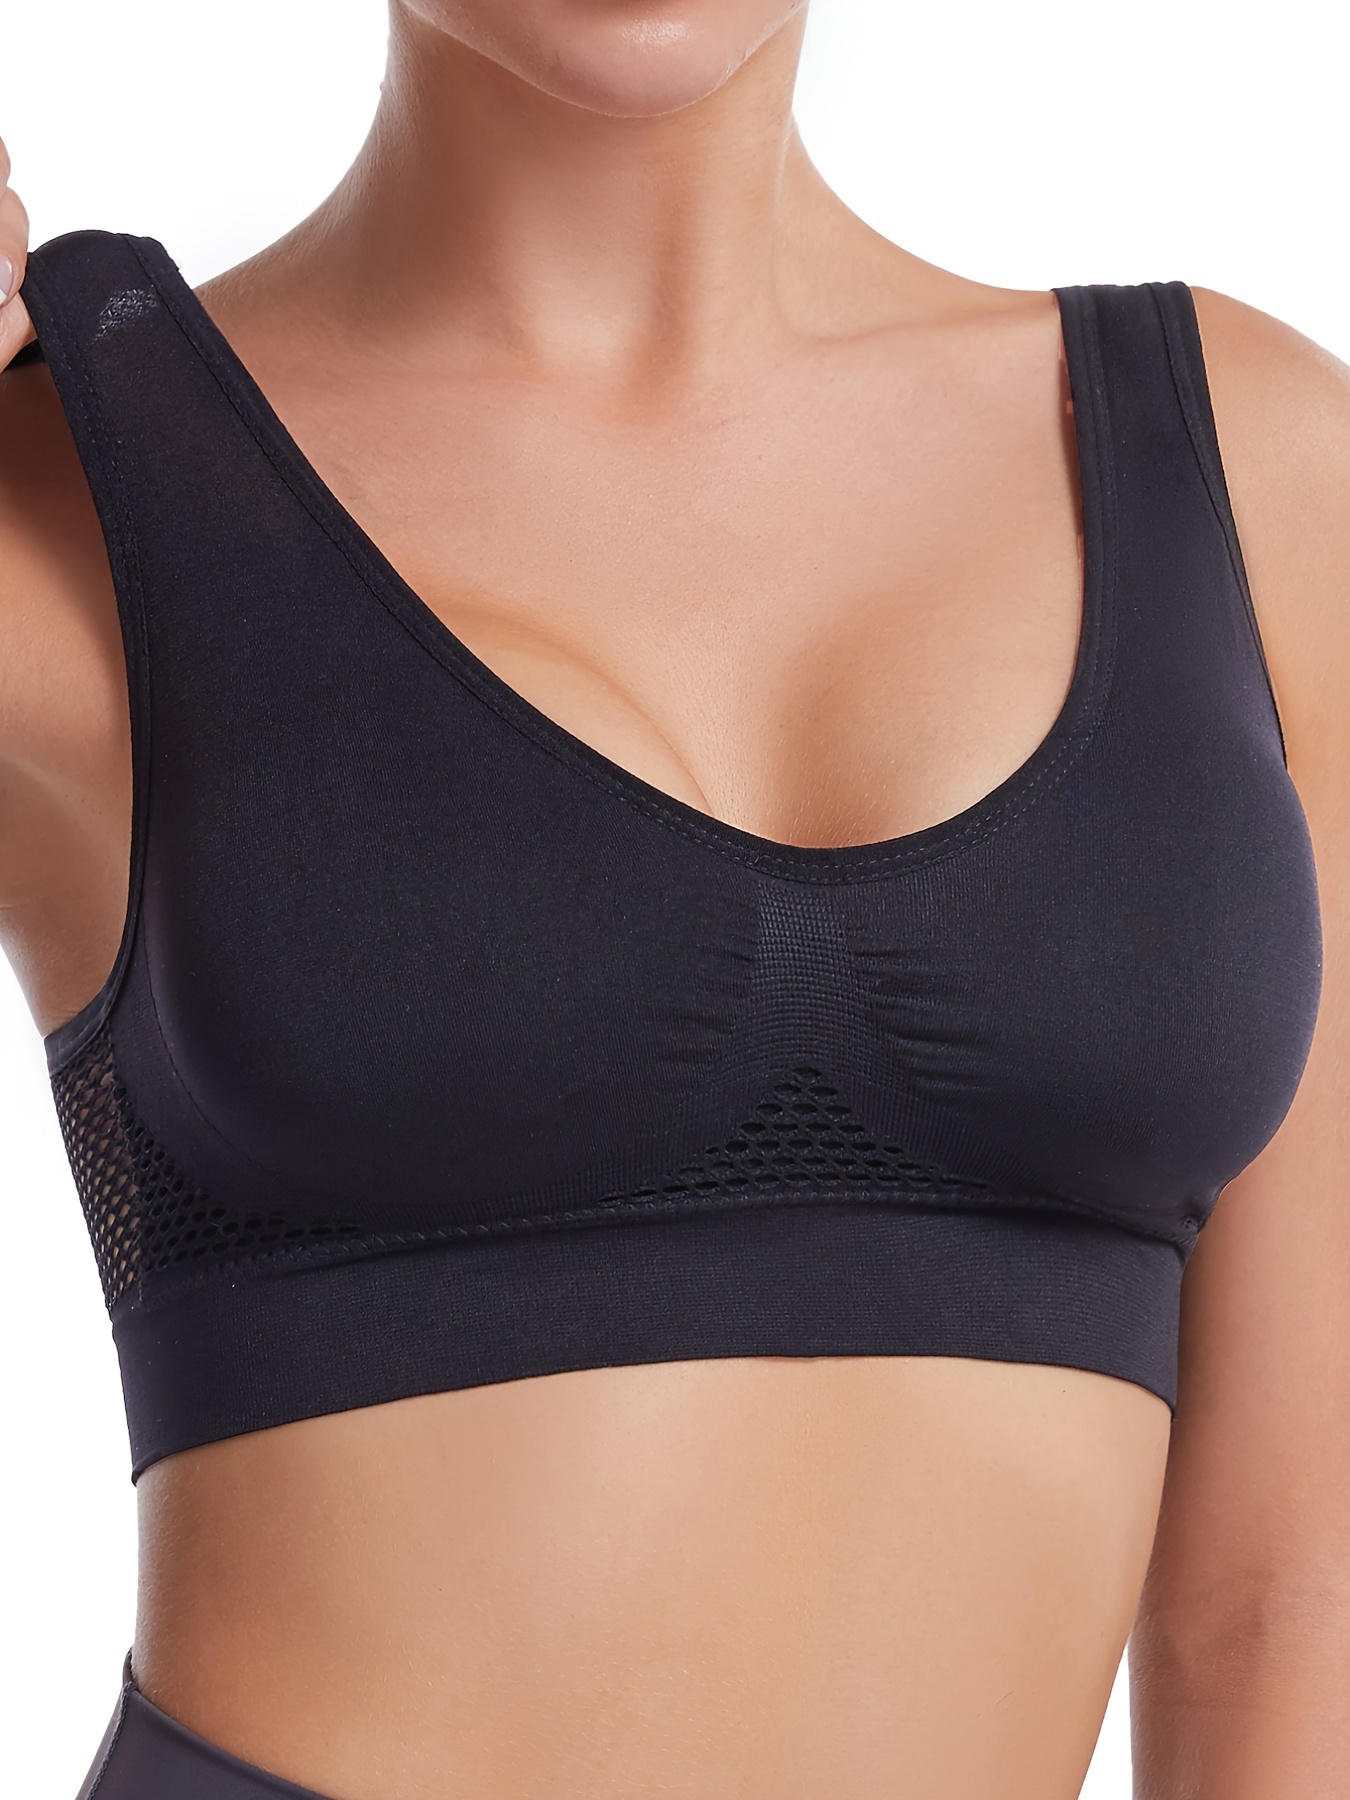 Sports Bras for Women, Seamless Comfortable Yoga Bra with